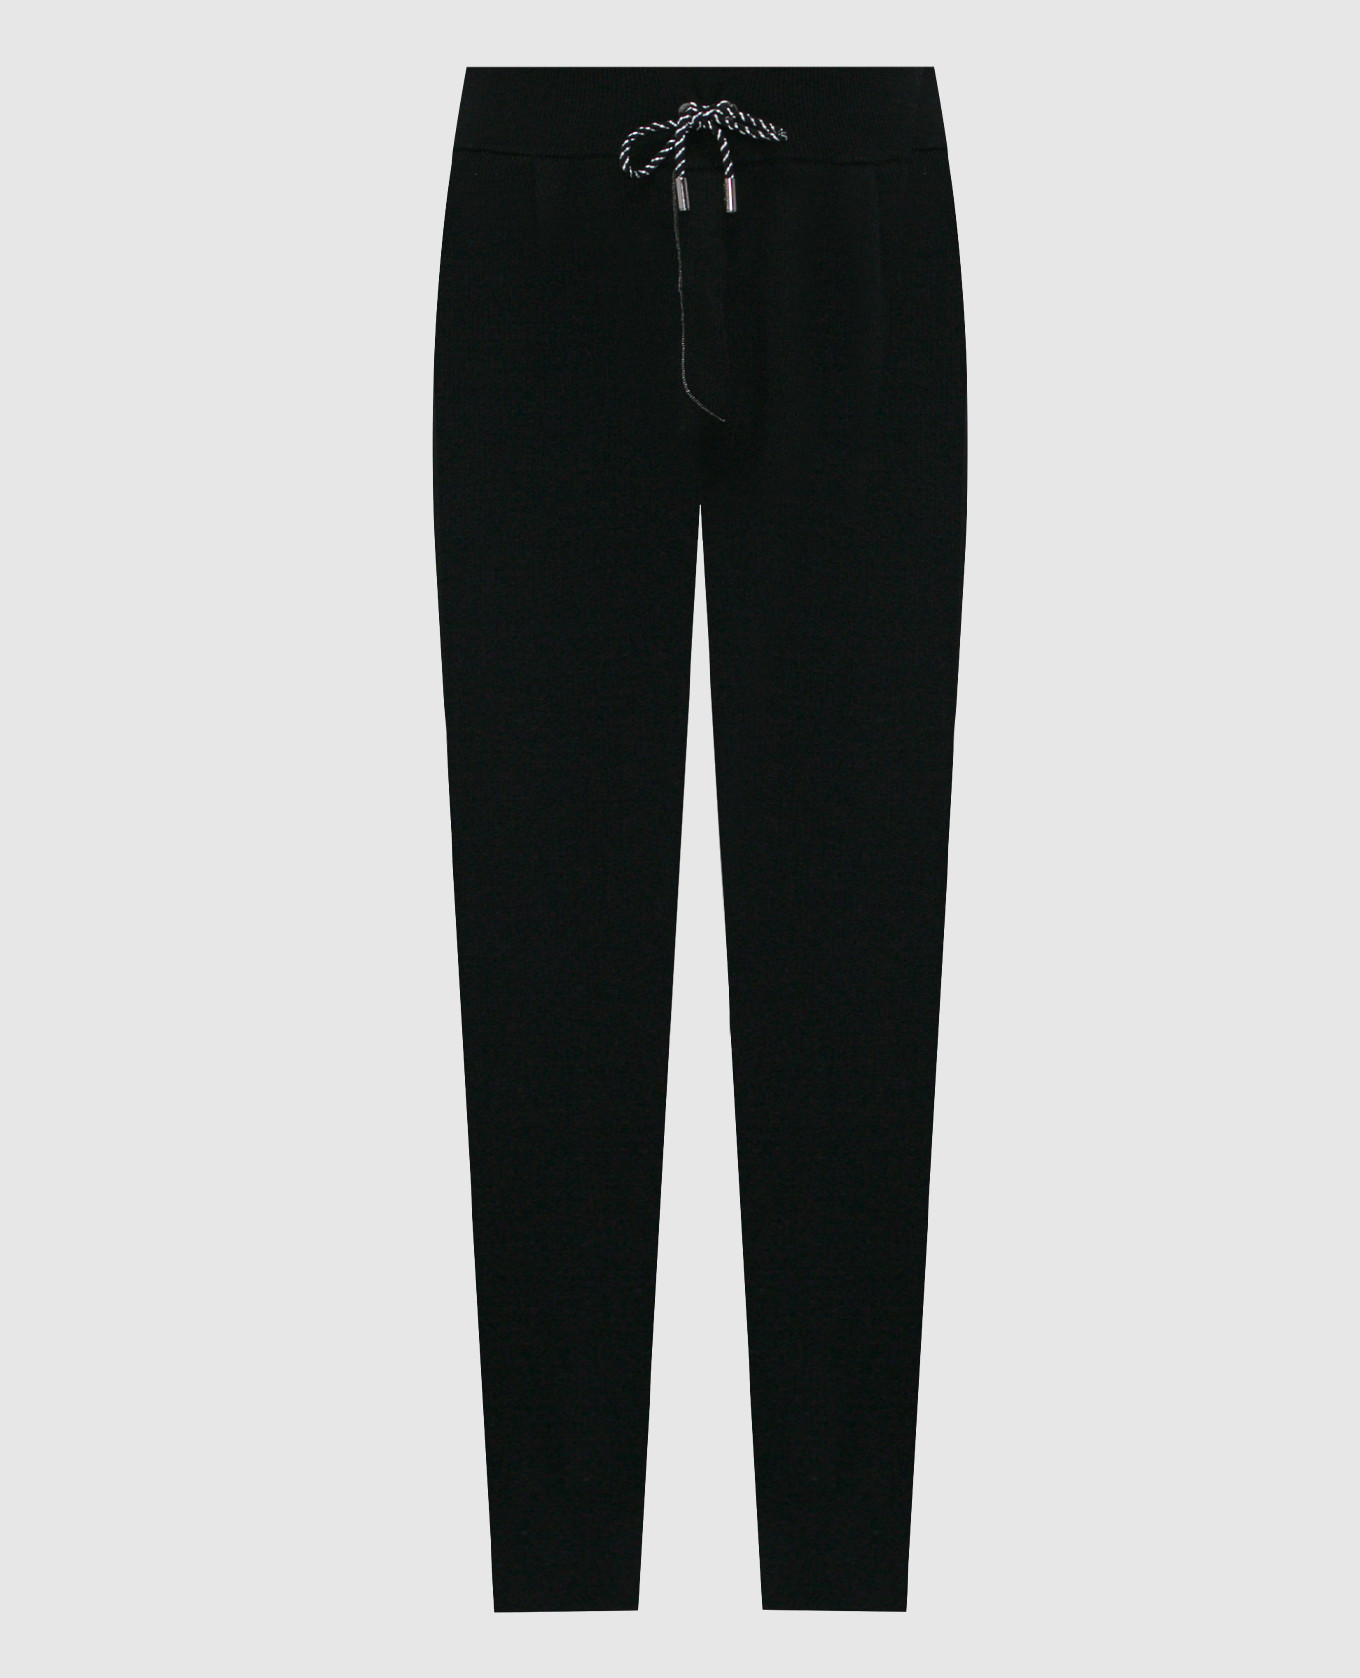 Black wool and cashmere joggers with monil chain